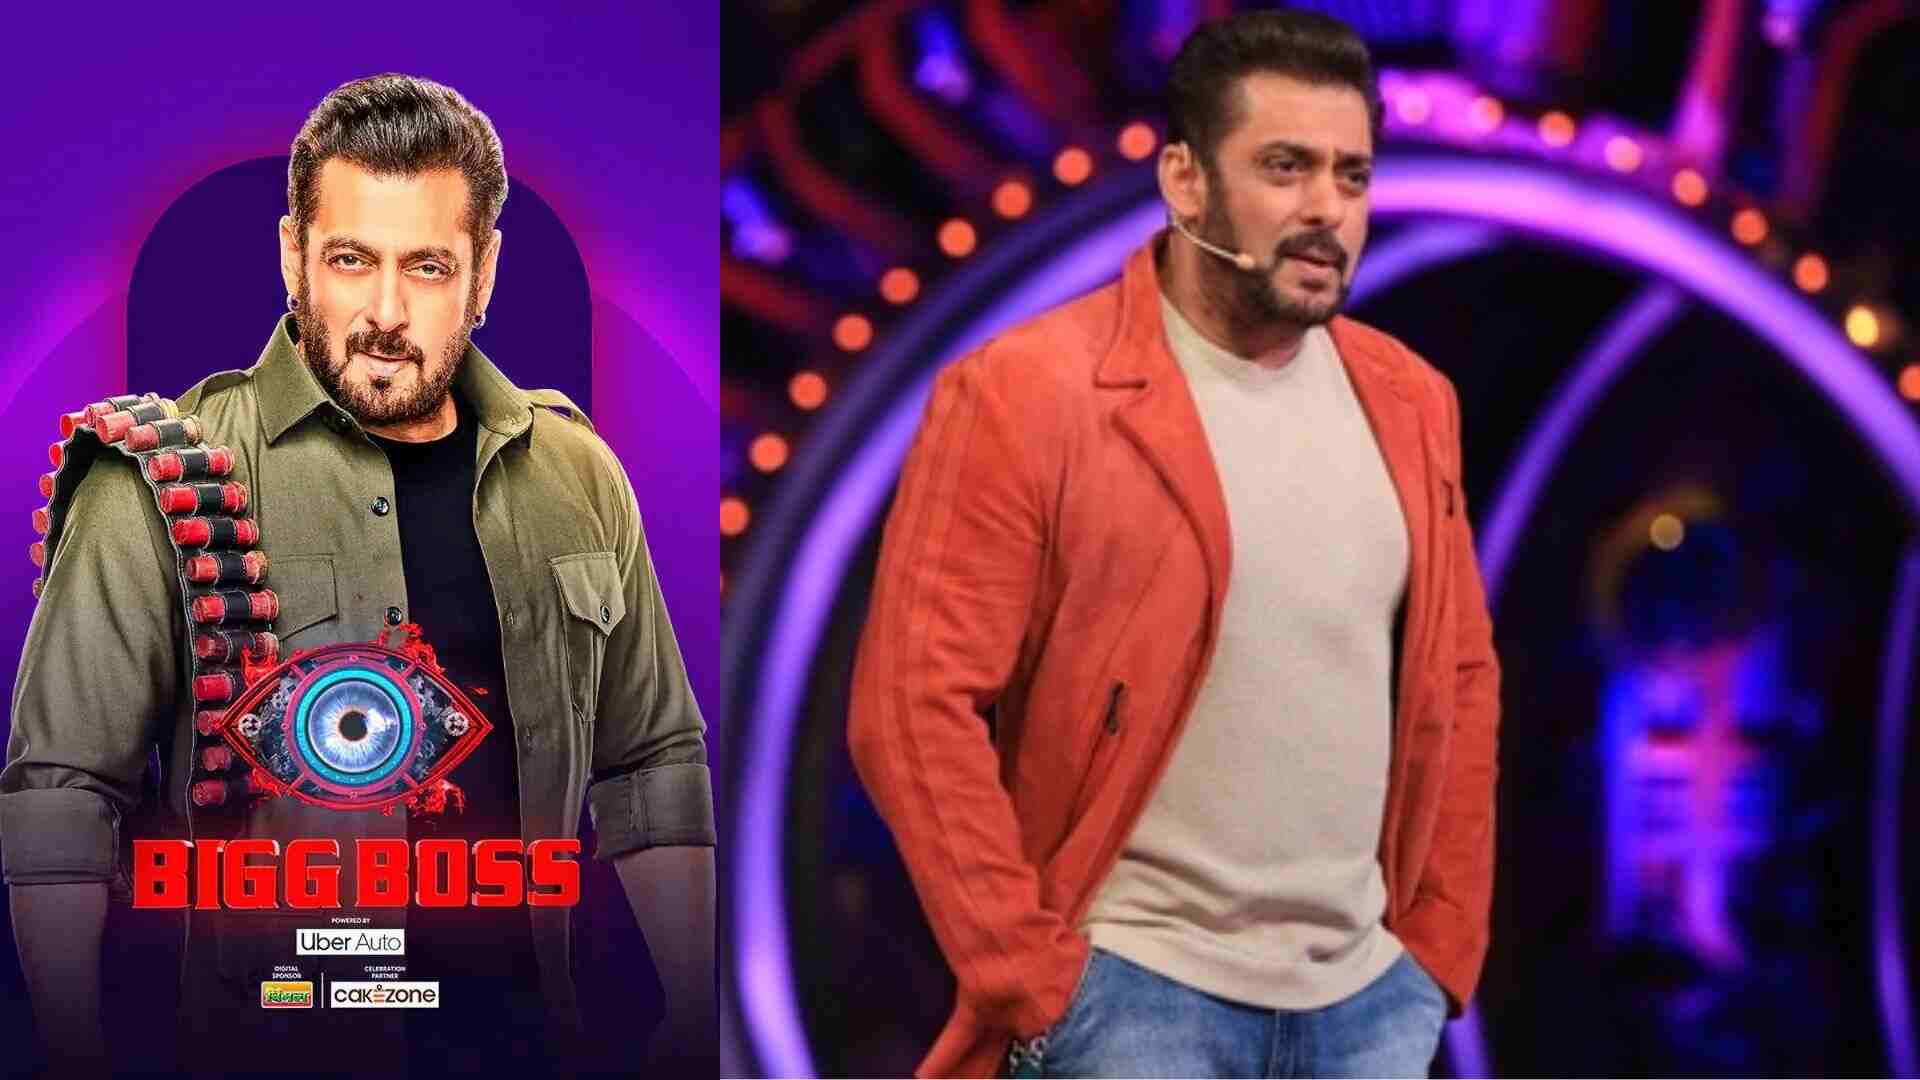 Bigg Boss 18 Set To Premiere This Fall With Salman Khan Returning As Host